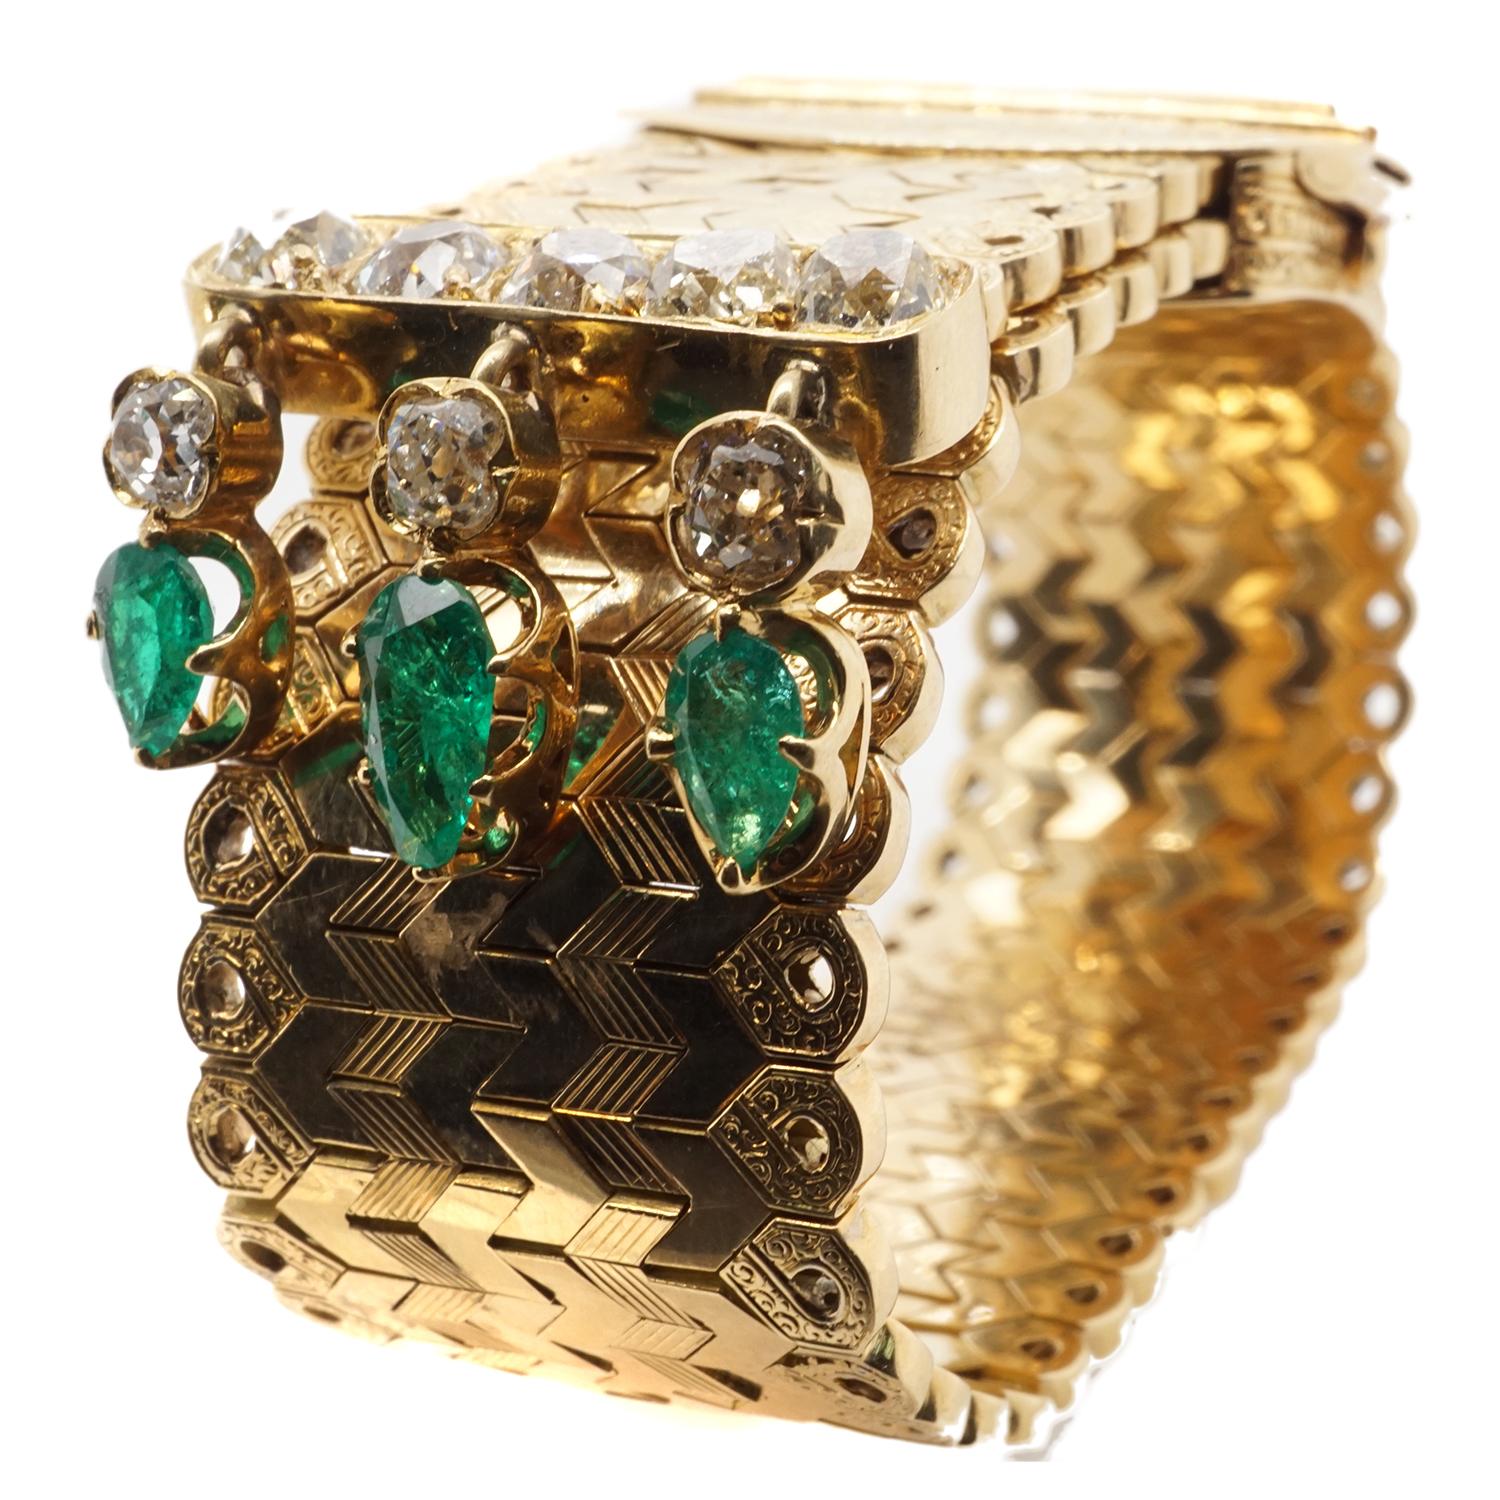 Crafted in 18 karat gold this slide bracelet features 8 old mine cut diamonds and 3 pear shape emeralds.  Measures 8 3/4 